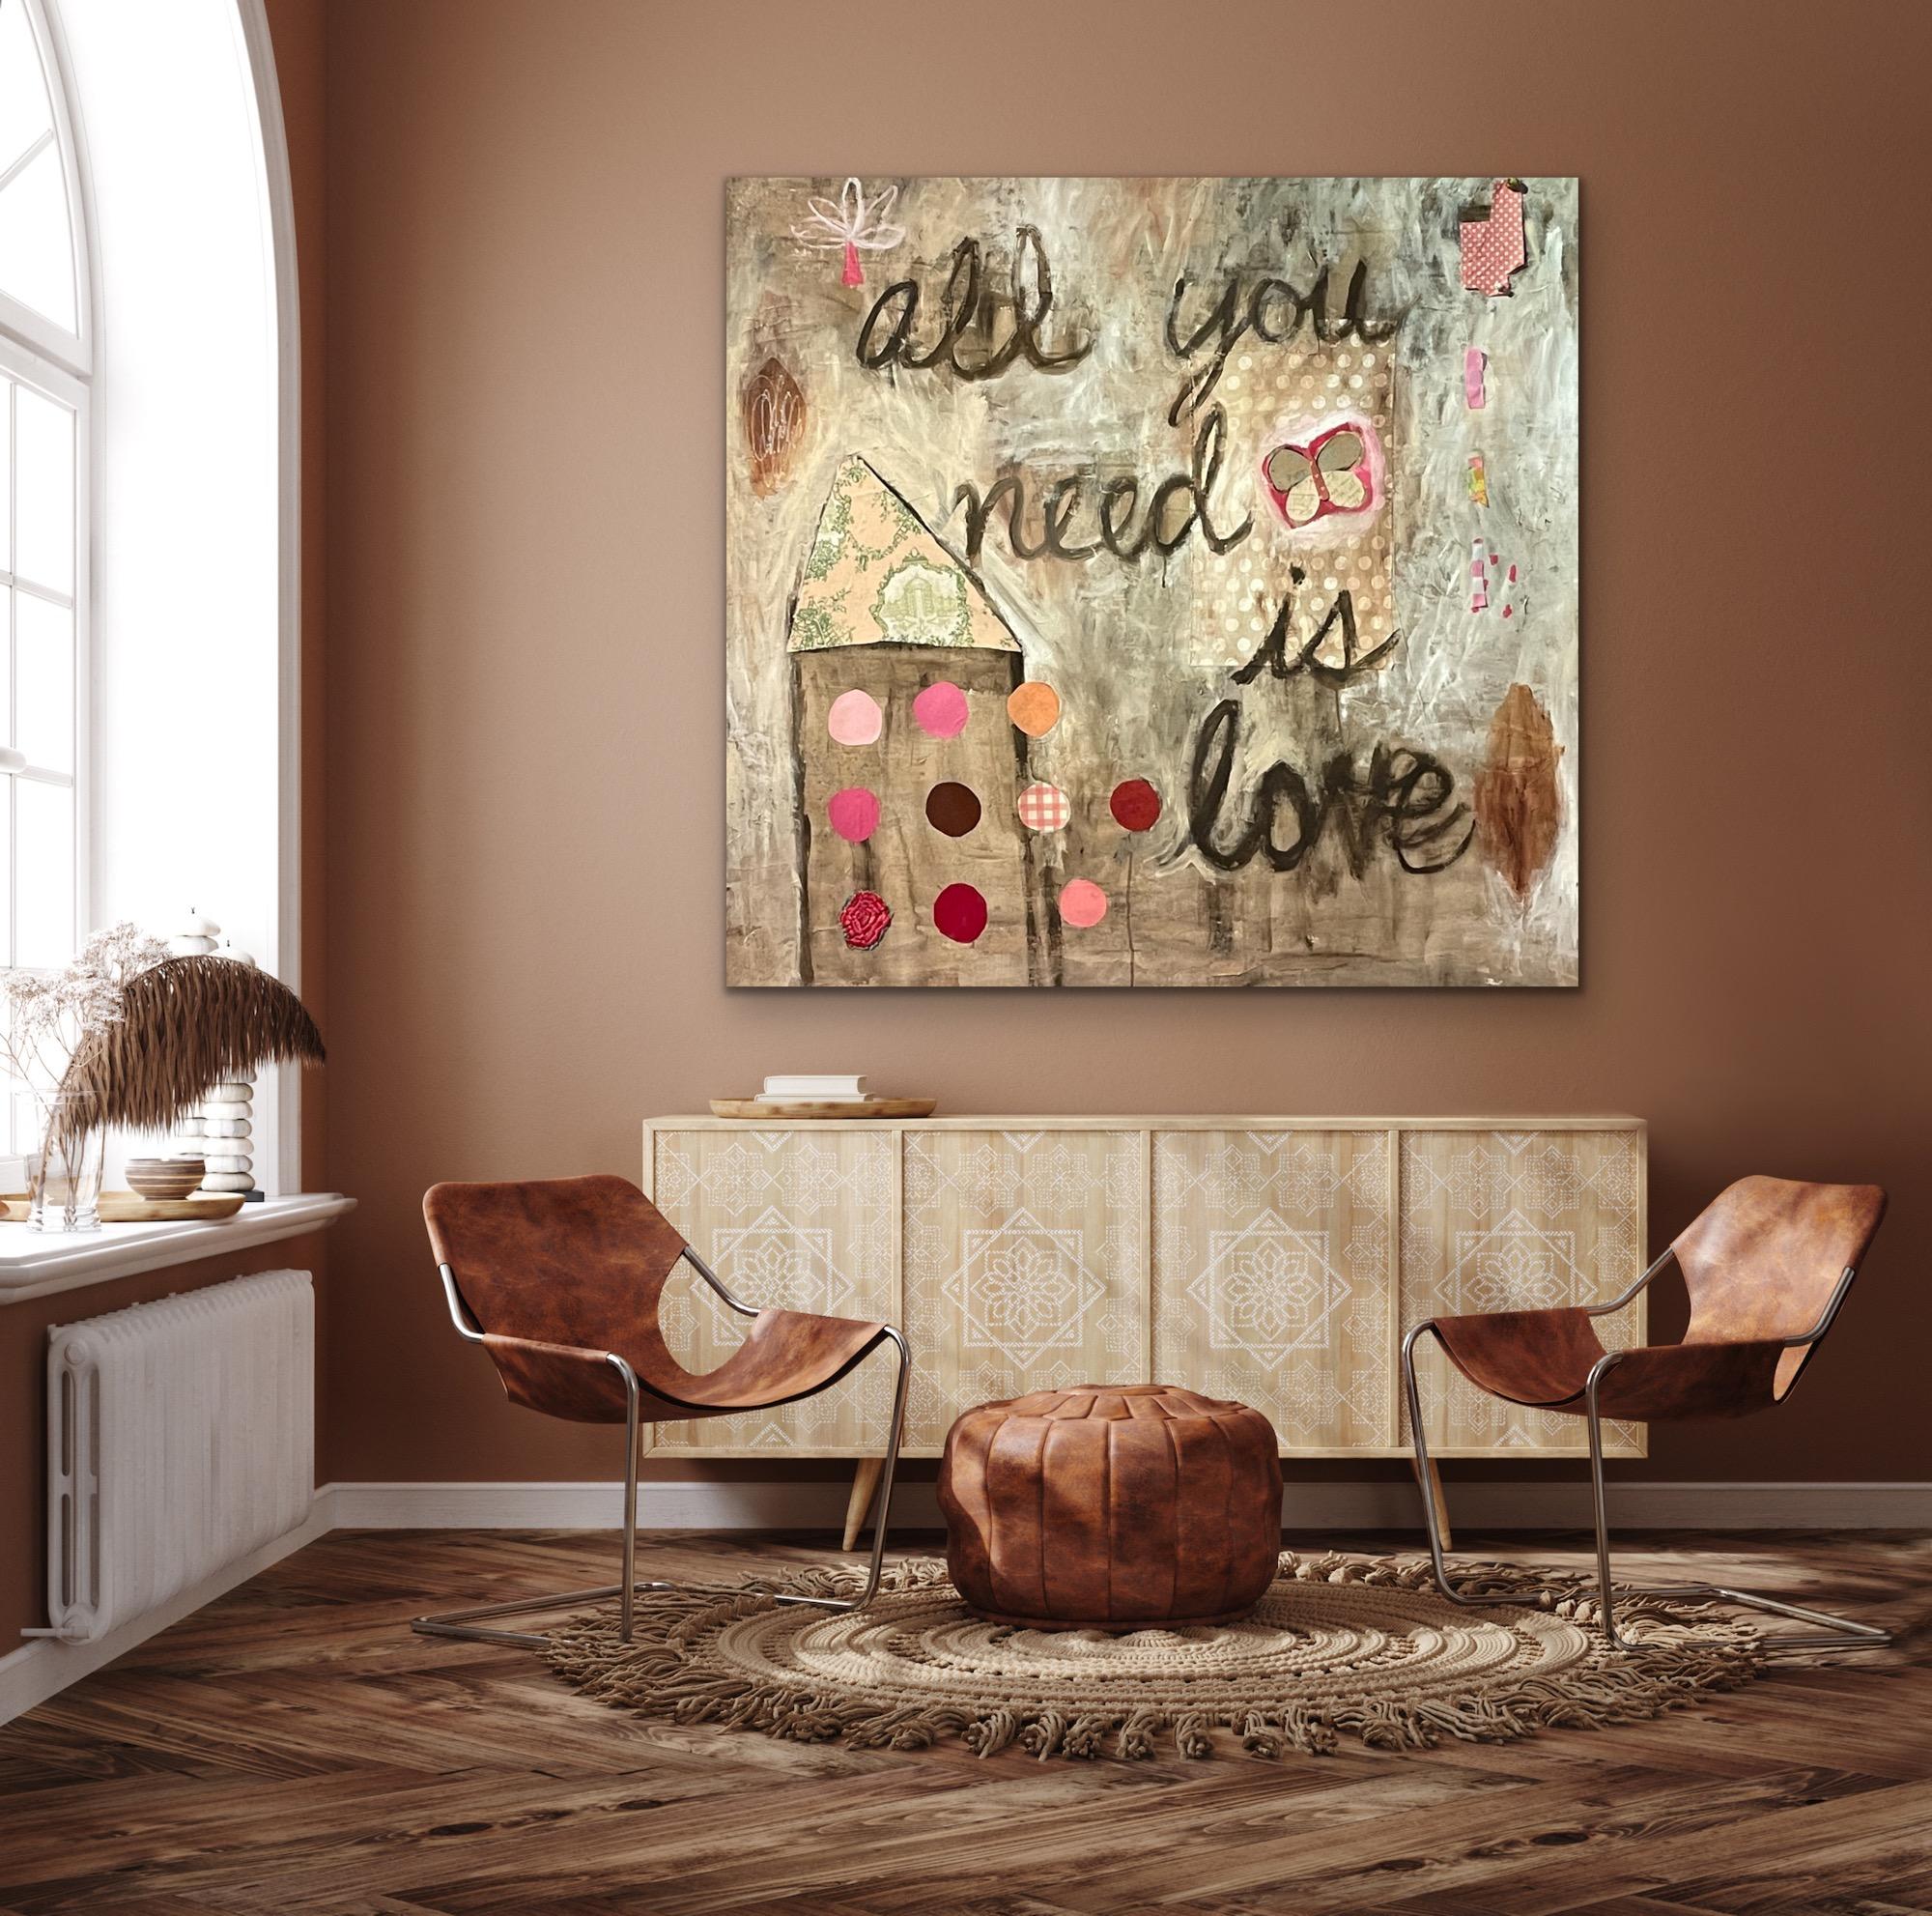 All You Need Is Love - Painting by Pam Smilow